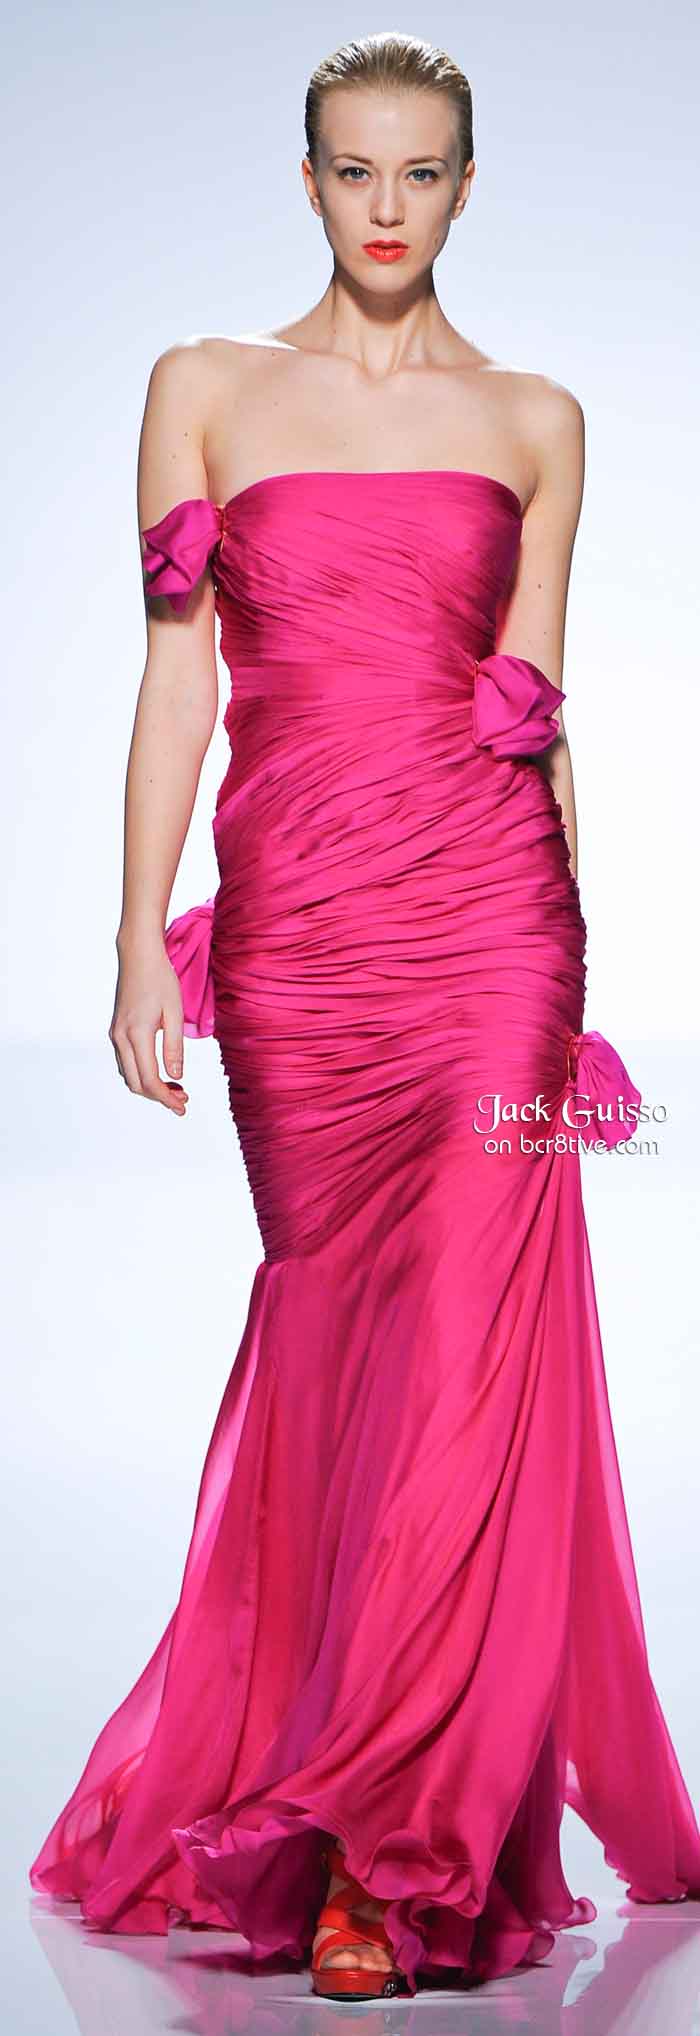 Jack Guisso Spring 2011 Couture – Be Creative